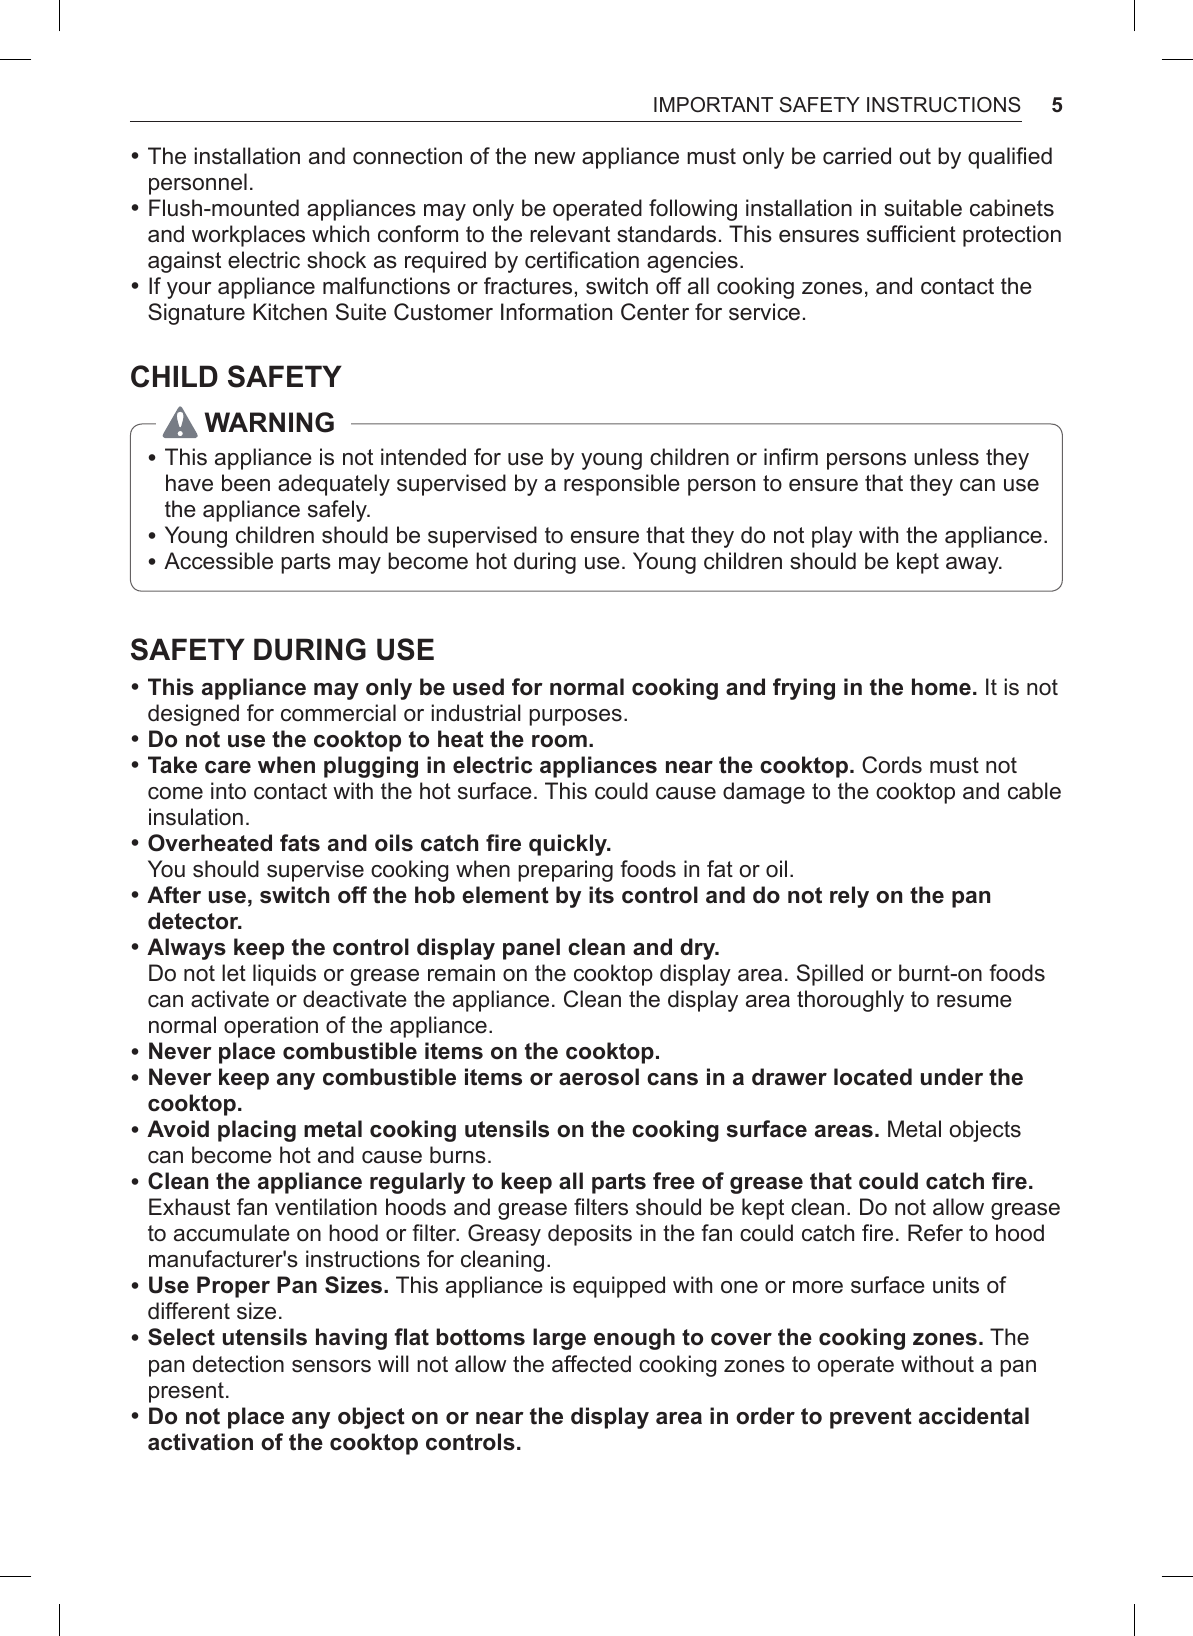 5IMPORTANT SAFETY INSTRUCTIONS •The installation and connection of the new appliance must only be carried out by qualified personnel. •Flush-mounted appliances may only be operated following installation in suitable cabinets and workplaces which conform to the relevant standards. This ensures sufficient protection against electric shock as required by certification agencies. •If your appliance malfunctions or fractures, switch off all cooking zones, and contact the Signature Kitchen Suite Customer Information Center for service.CHILD SAFETYWARNING •This appliance is not intended for use by young children or infirm persons unless they have been adequately supervised by a responsible person to ensure that they can use the appliance safely. •Young children should be supervised to ensure that they do not play with the appliance. •Accessible parts may become hot during use. Young children should be kept away.SAFETY DURING USE •This appliance may only be used for normal cooking and frying in the home. It is not designed for commercial or industrial purposes. •Do not use the cooktop to heat the room. •Take care when plugging in electric appliances near the cooktop. Cords must not come into contact with the hot surface. This could cause damage to the cooktop and cable insulation. •Overheated fats and oils catch fire quickly.  You should supervise cooking when preparing foods in fat or oil. •After use, switch off the hob element by its control and do not rely on the pan detector. •Always keep the control display panel clean and dry.  Do not let liquids or grease remain on the cooktop display area. Spilled or burnt-on foods can activate or deactivate the appliance. Clean the display area thoroughly to resume normal operation of the appliance. •Never place combustible items on the cooktop. •Never keep any combustible items or aerosol cans in a drawer located under the cooktop. •Avoid placing metal cooking utensils on the cooking surface areas. Metal objects can become hot and cause burns. •Clean the appliance regularly to keep all parts free of grease that could catch fire. Exhaust fan ventilation hoods and grease filters should be kept clean. Do not allow grease to accumulate on hood or filter. Greasy deposits in the fan could catch fire. Refer to hood manufacturer&apos;s instructions for cleaning. •Use Proper Pan Sizes. This appliance is equipped with one or more surface units of different size. •Select utensils having flat bottoms large enough to cover the cooking zones. The pan detection sensors will not allow the affected cooking zones to operate without a pan present. •Do not place any object on or near the display area in order to prevent accidental activation of the cooktop controls.